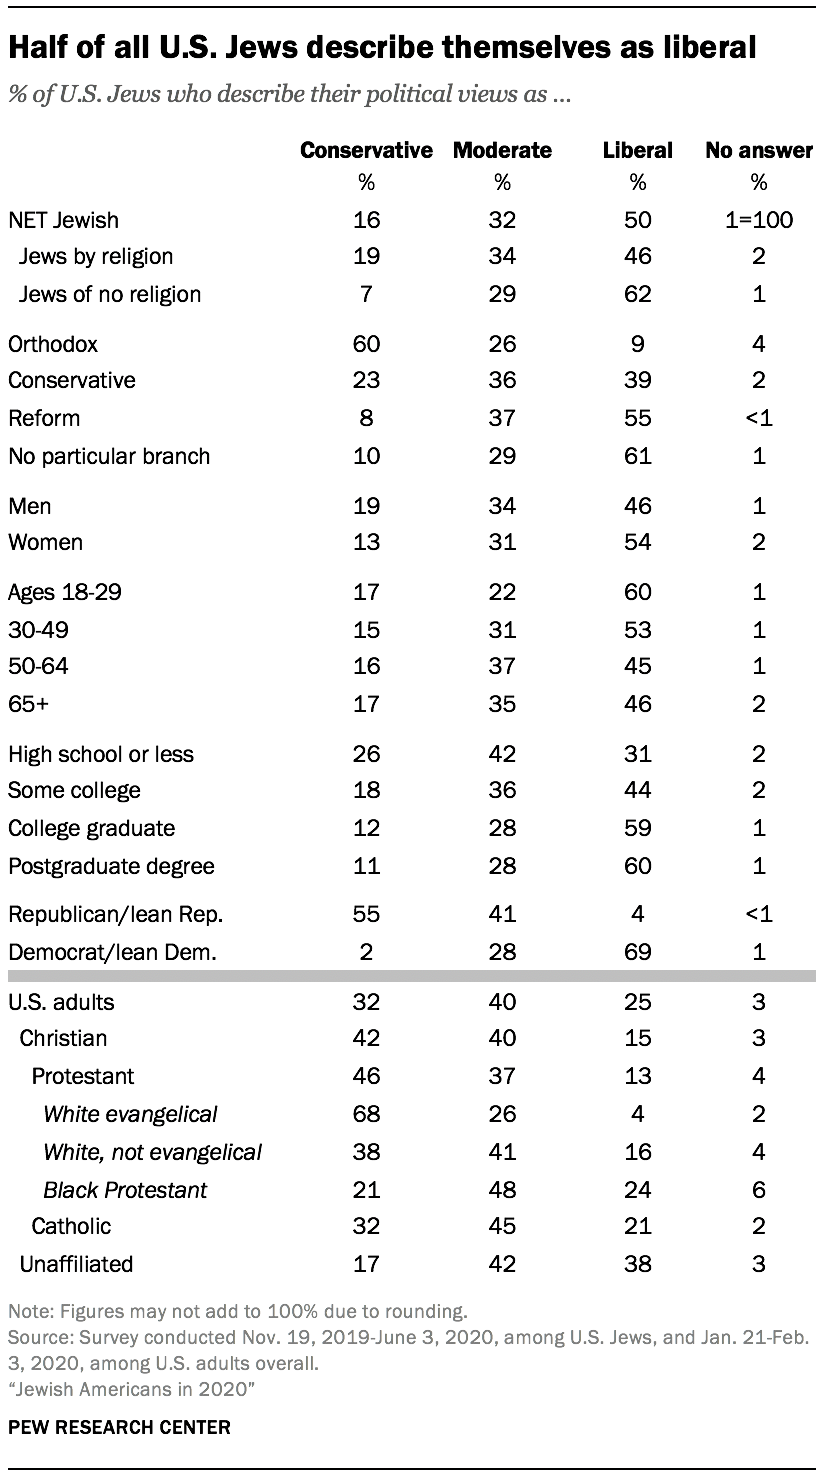 Half of all U.S. Jews describe themselves as liberal